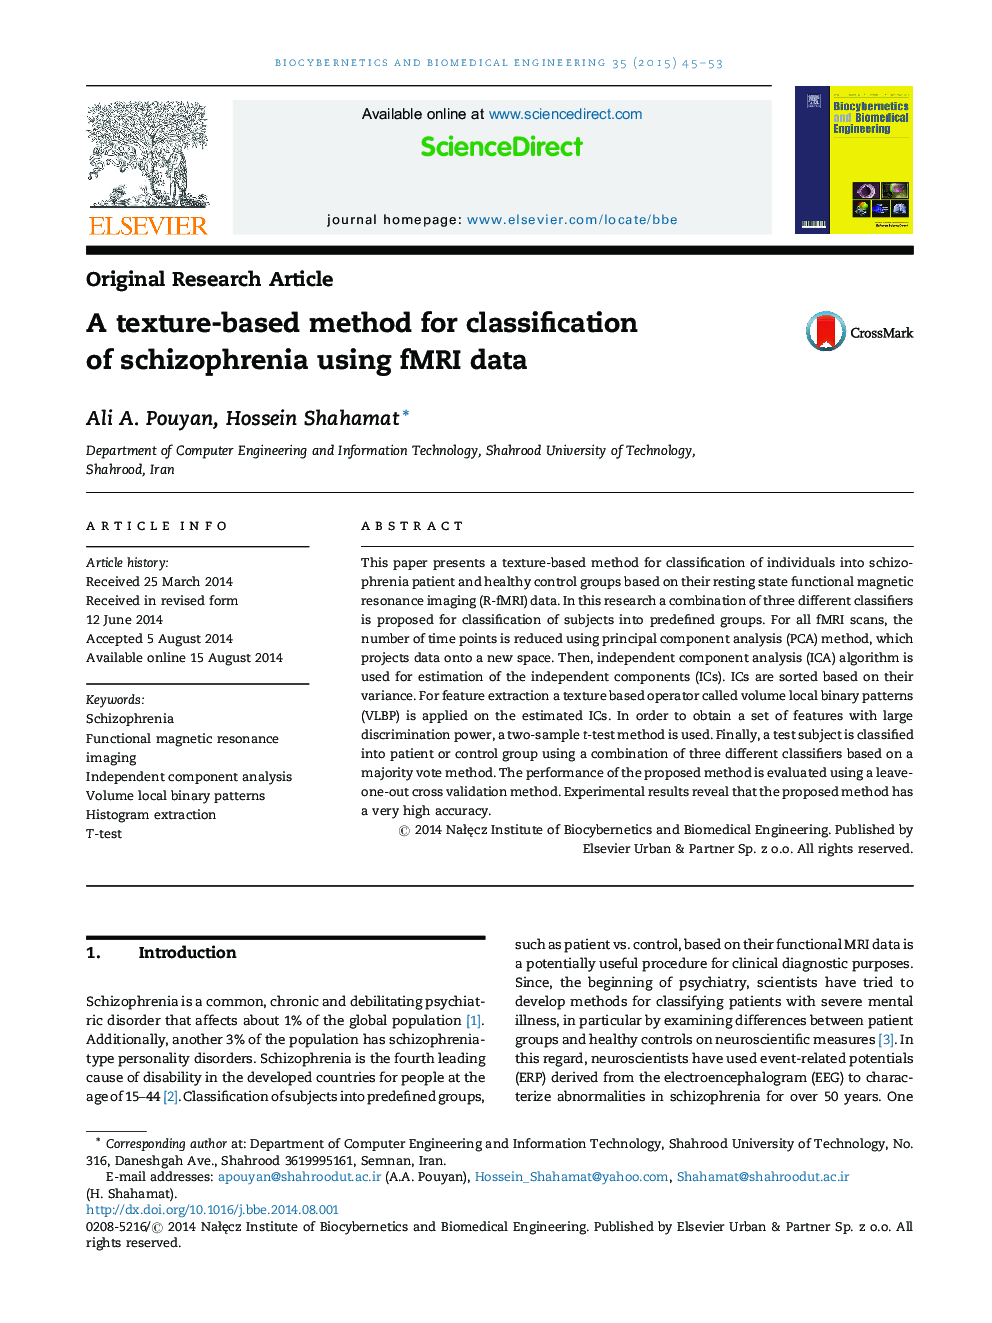 A texture-based method for classification of schizophrenia using fMRI data